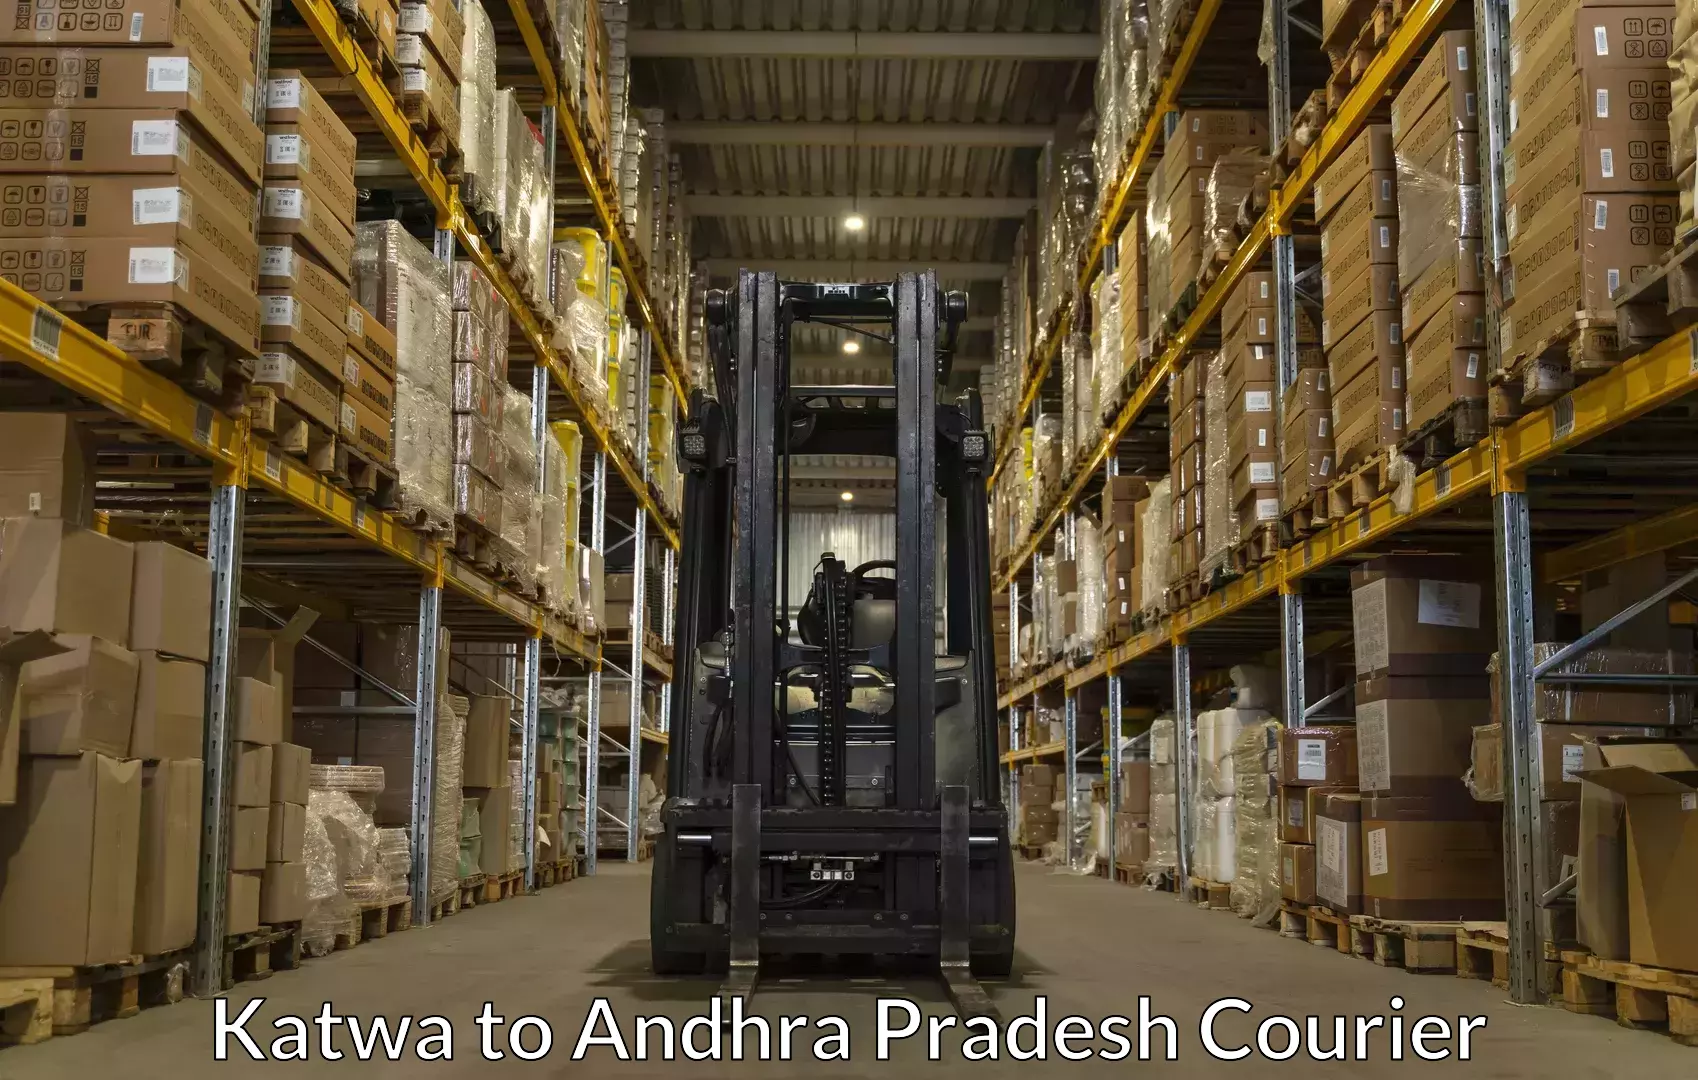 International baggage delivery in Katwa to Visakhapatnam Port